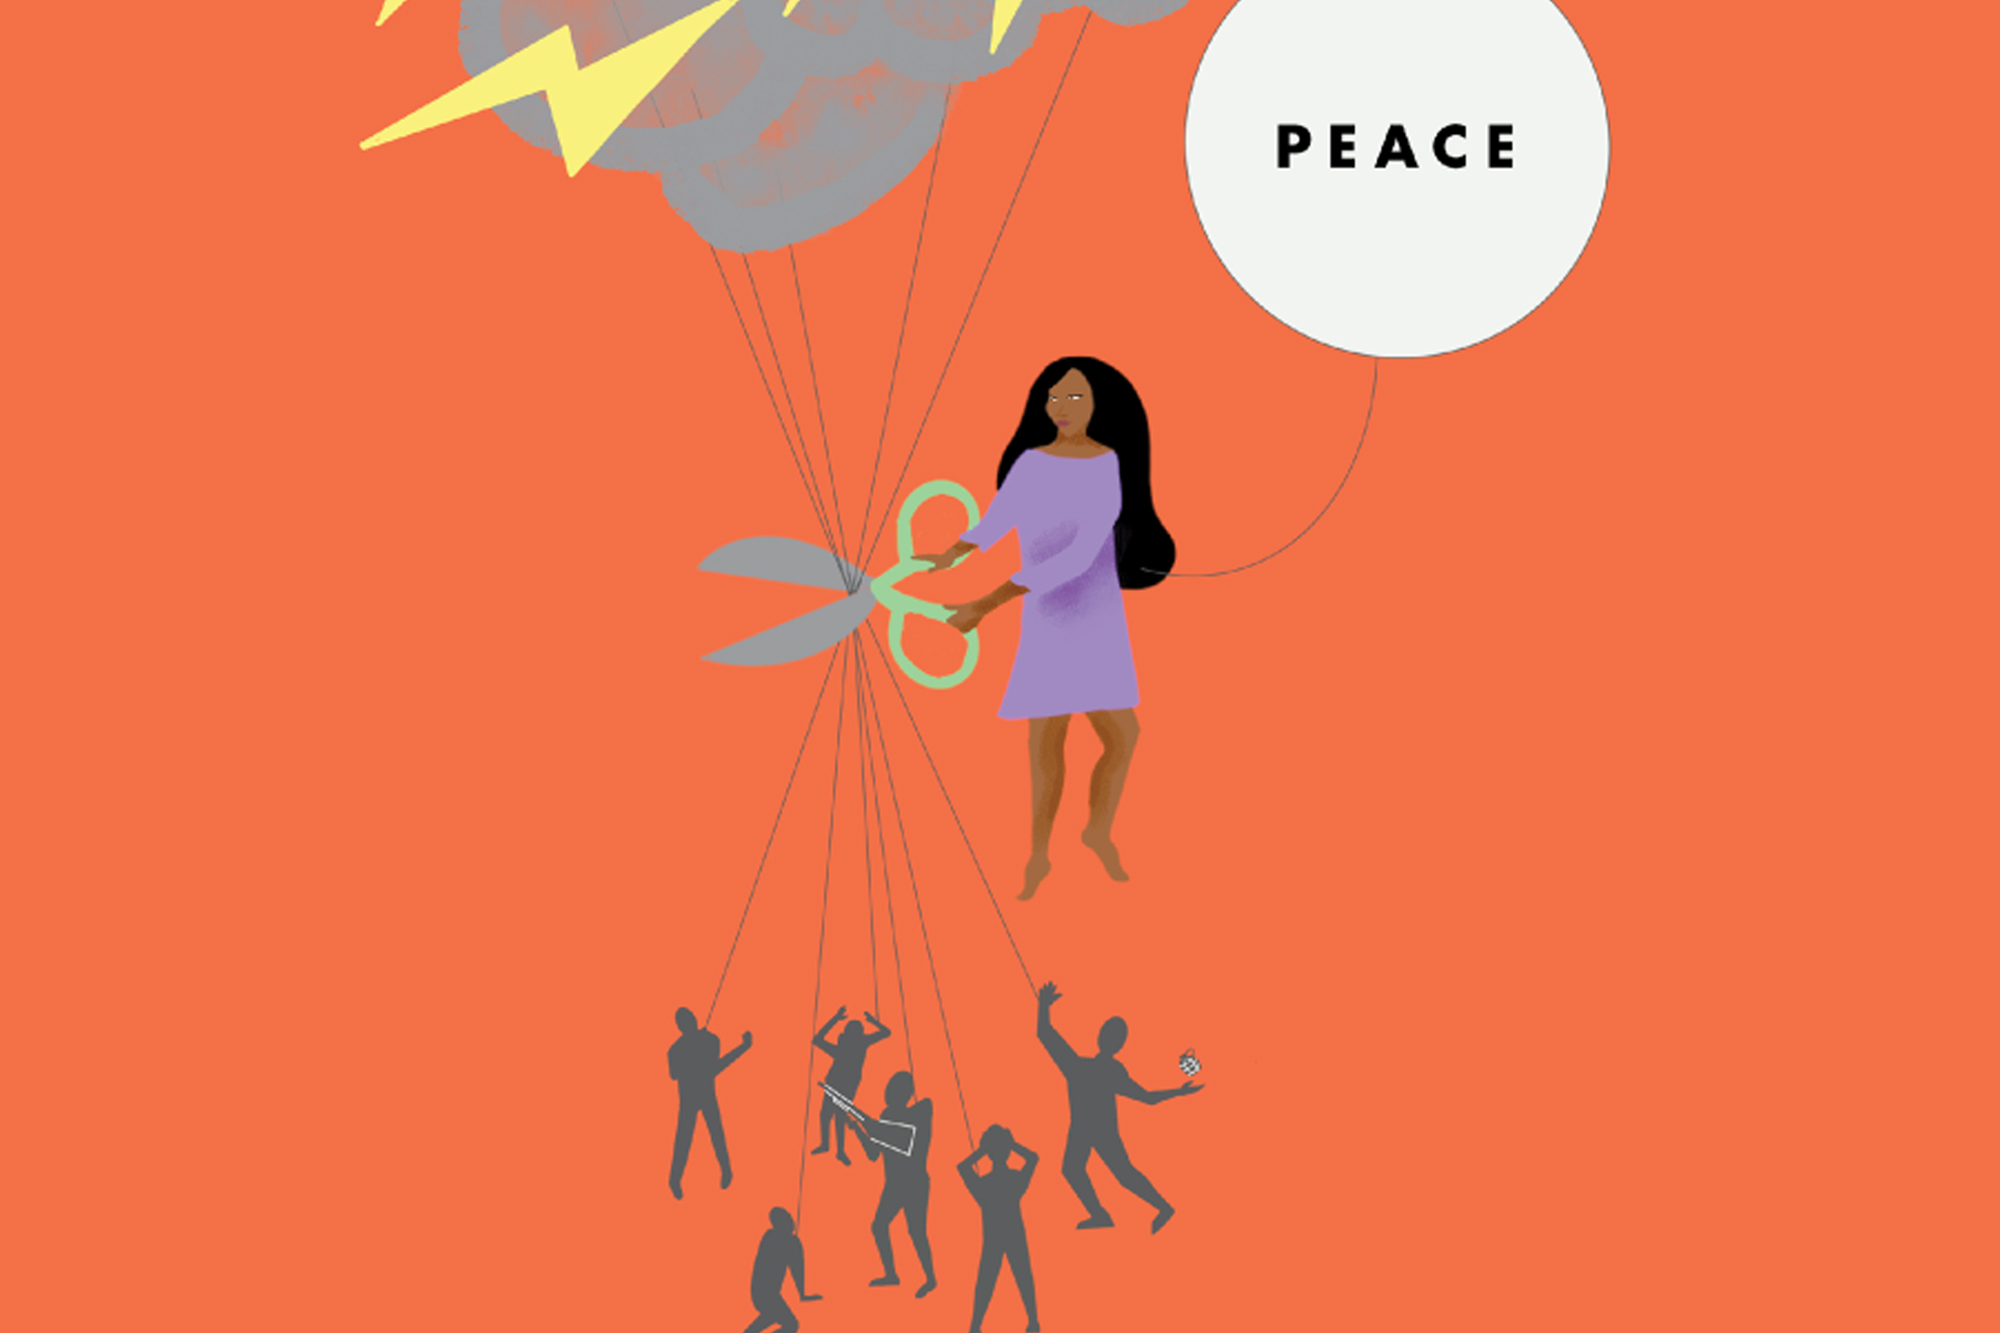 Image of a woman elevated by a balloon with the word peace written on it. She cuts the threads that hold a group of figures attached to a cloud.